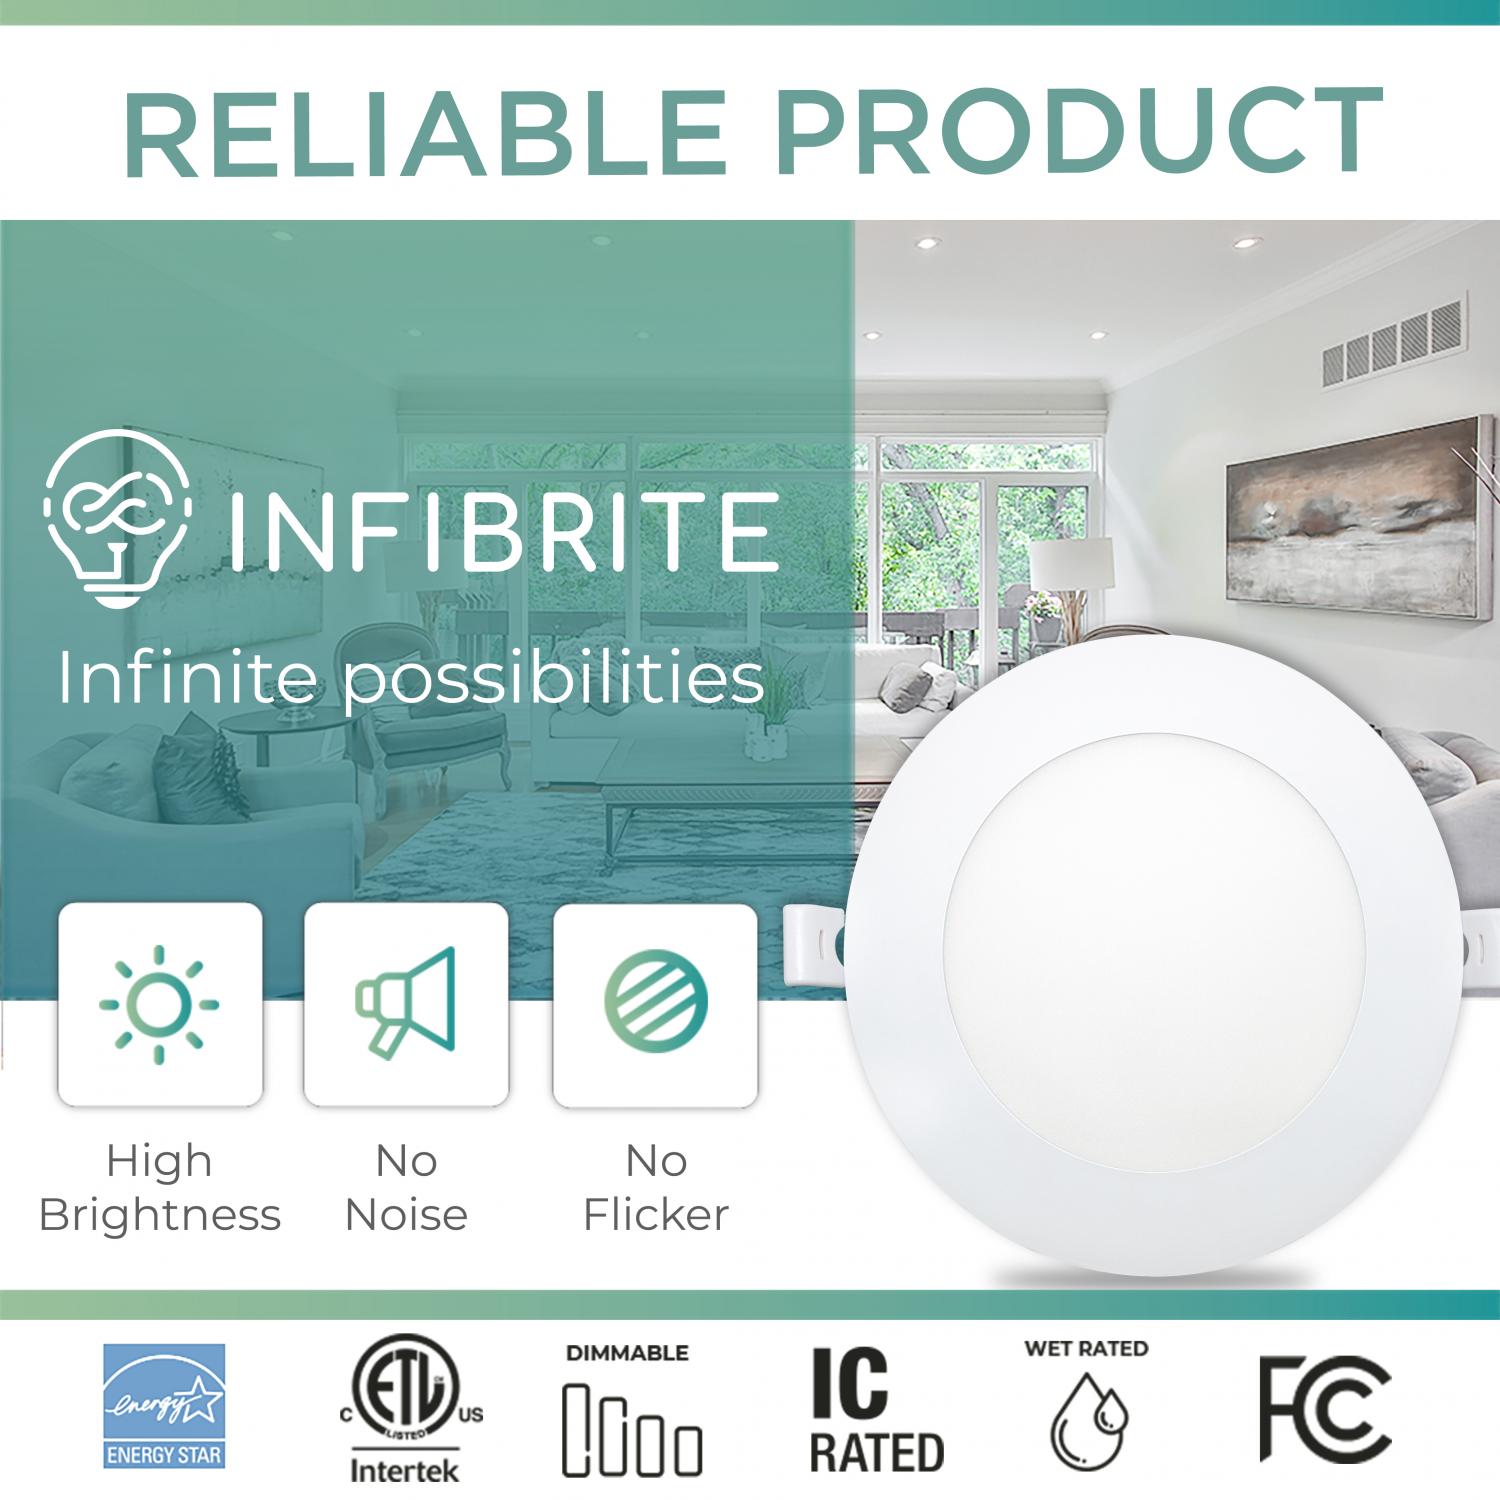 Infibrite 6 Inch 5000K Daylight 12W 1050LM Ultra-Slim LED Ceiling Light with Junction Box, Flush Mount, Dimmable, Fixture for Bedroom, Wet Rated for Bathroom, Easy Install, 110W Eqv, ETL & Energy Star, US Company (12 Pack)